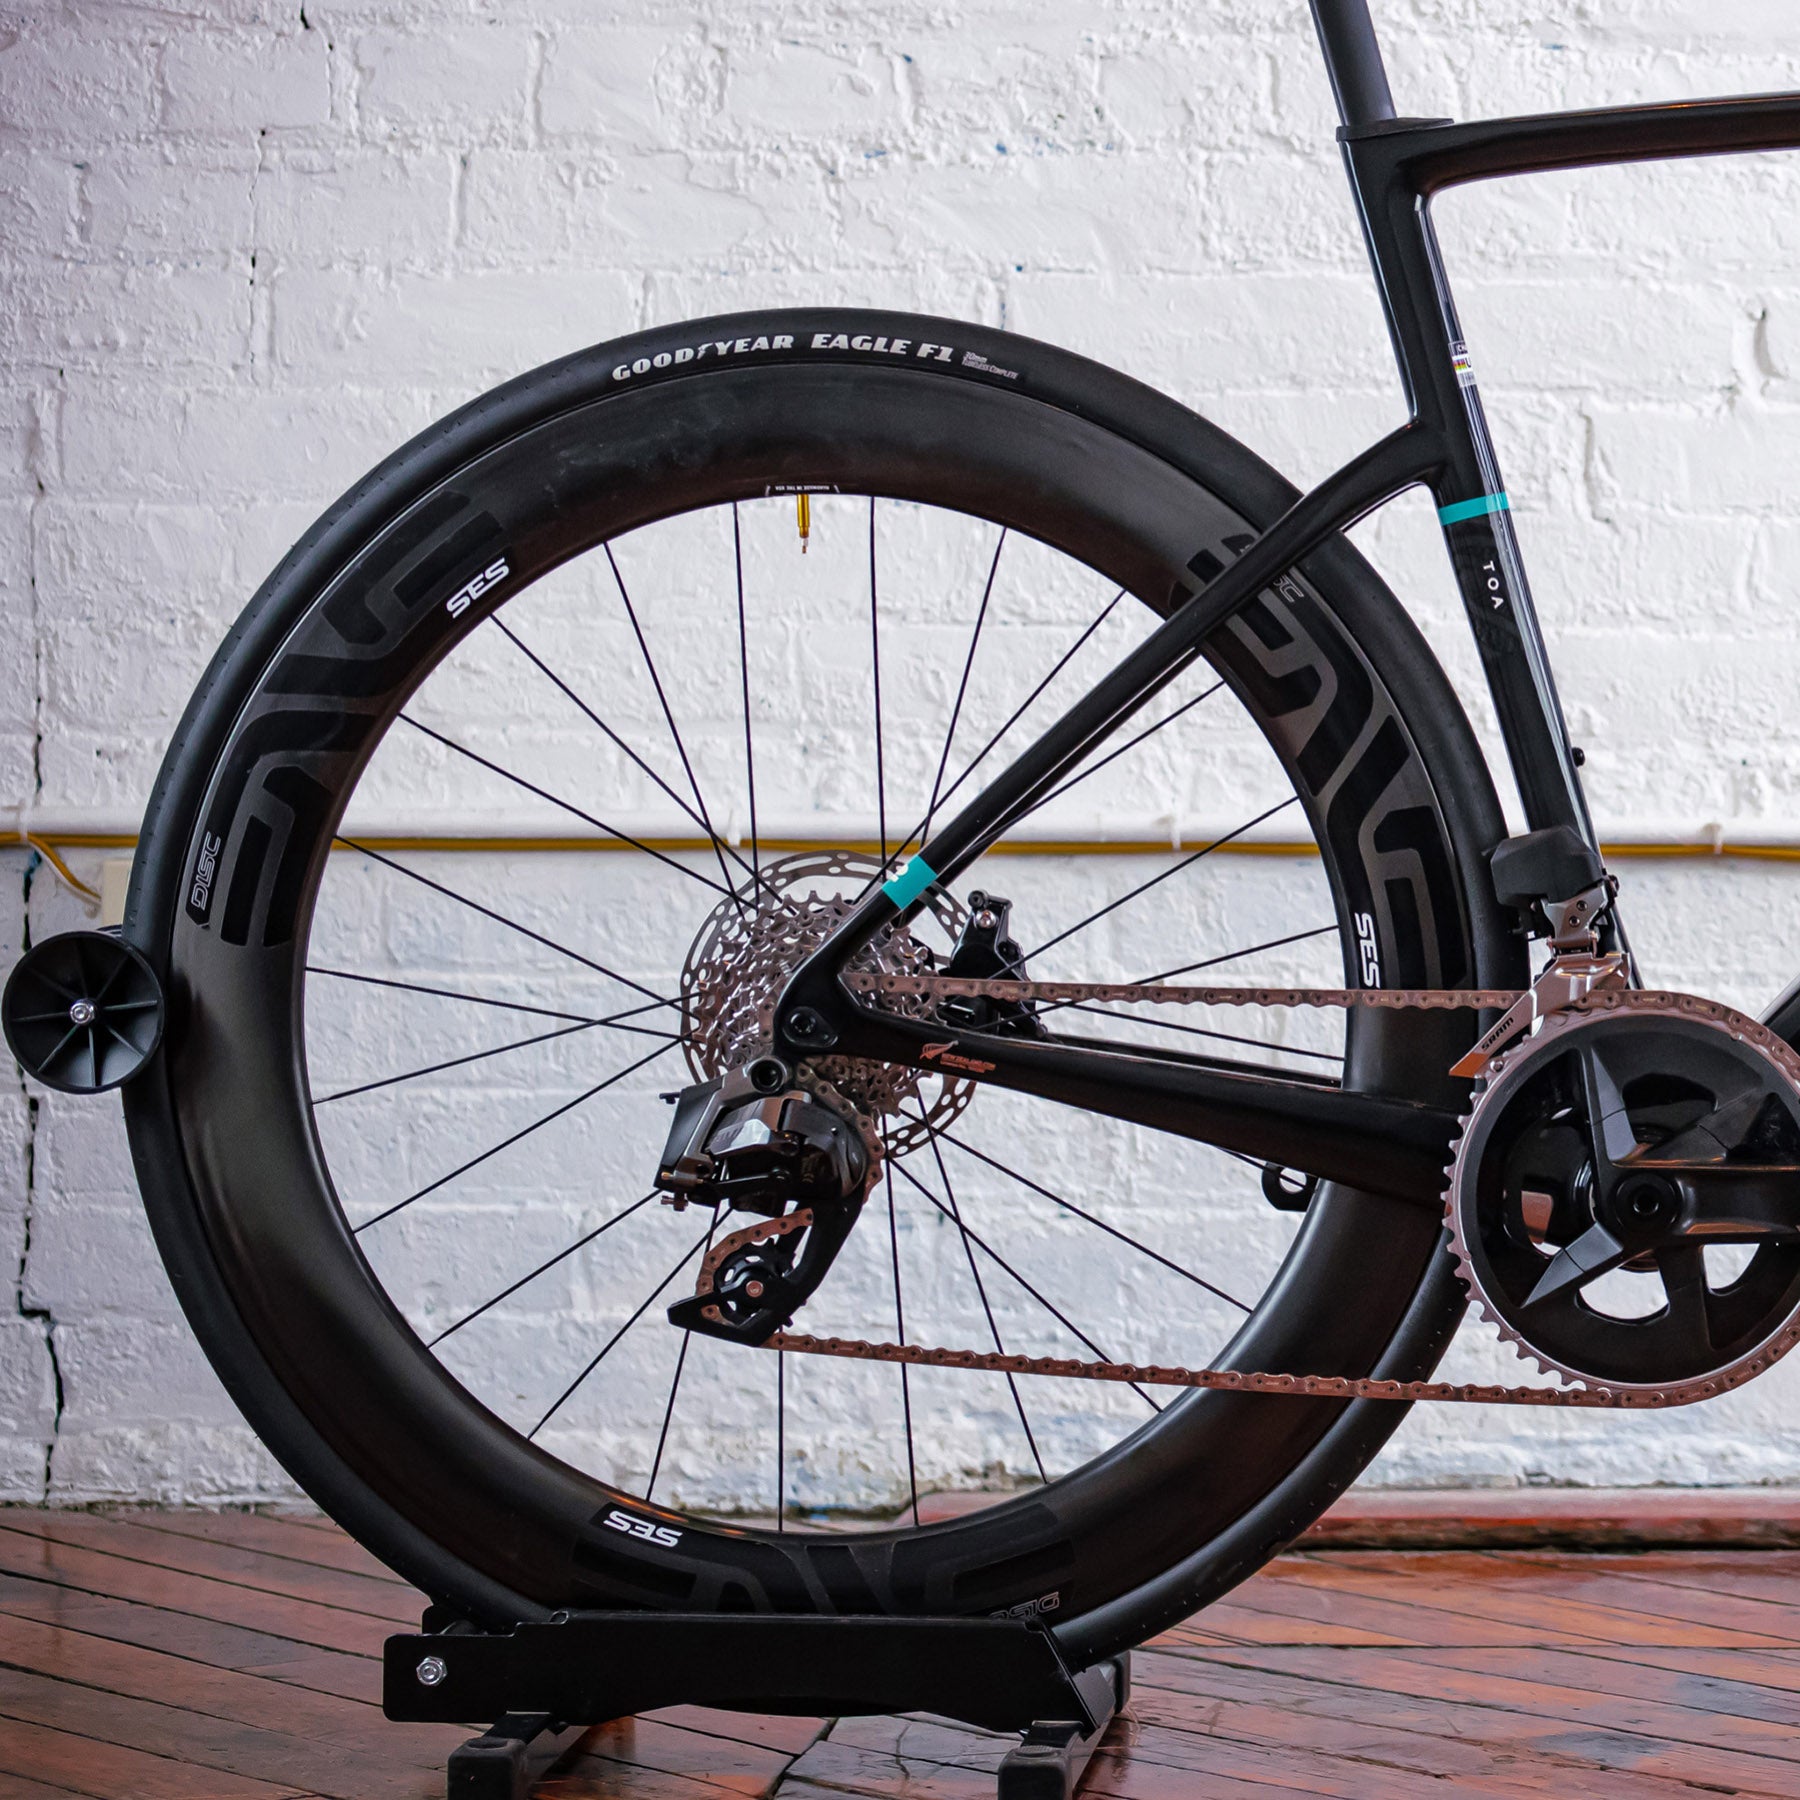 Image features the back tire, pedal, gears, and brake of the Chapter 2 TOA bike